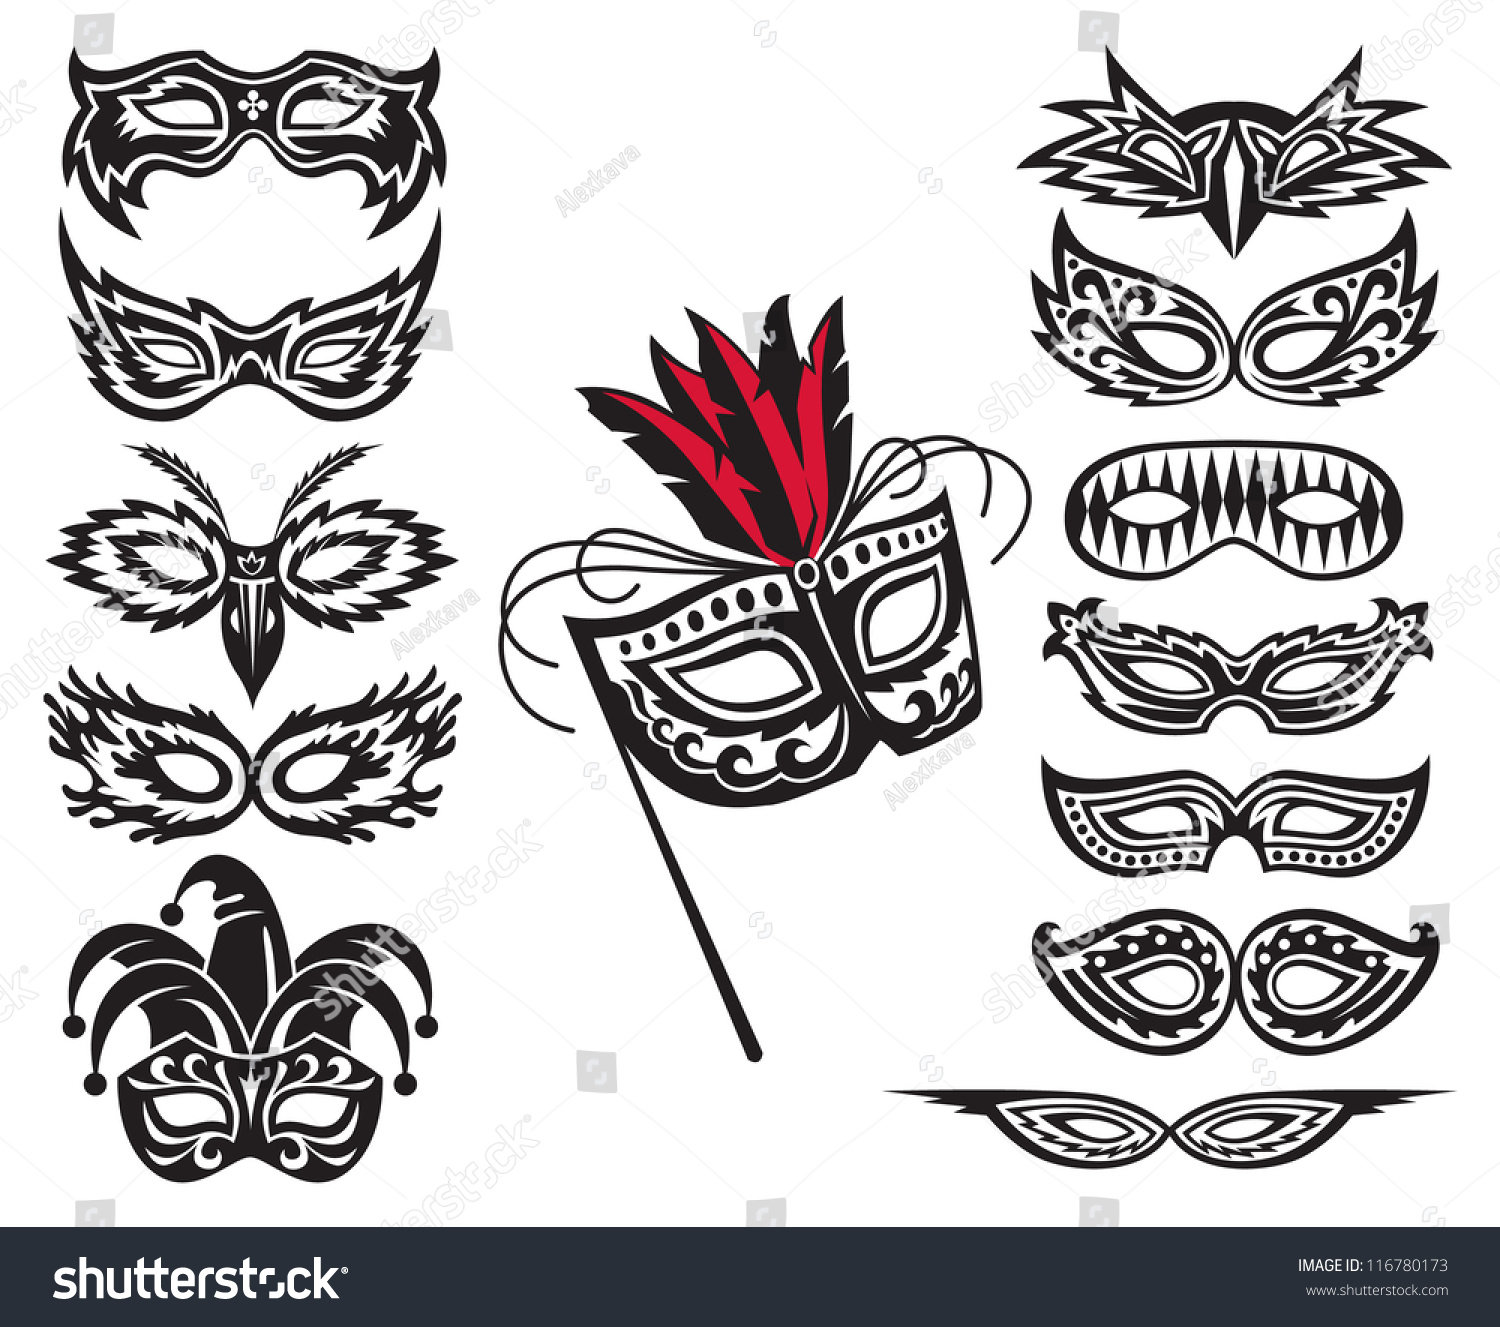 Set Of Isolated Carnival Masks Stock Vector Illustration 116780173 ...